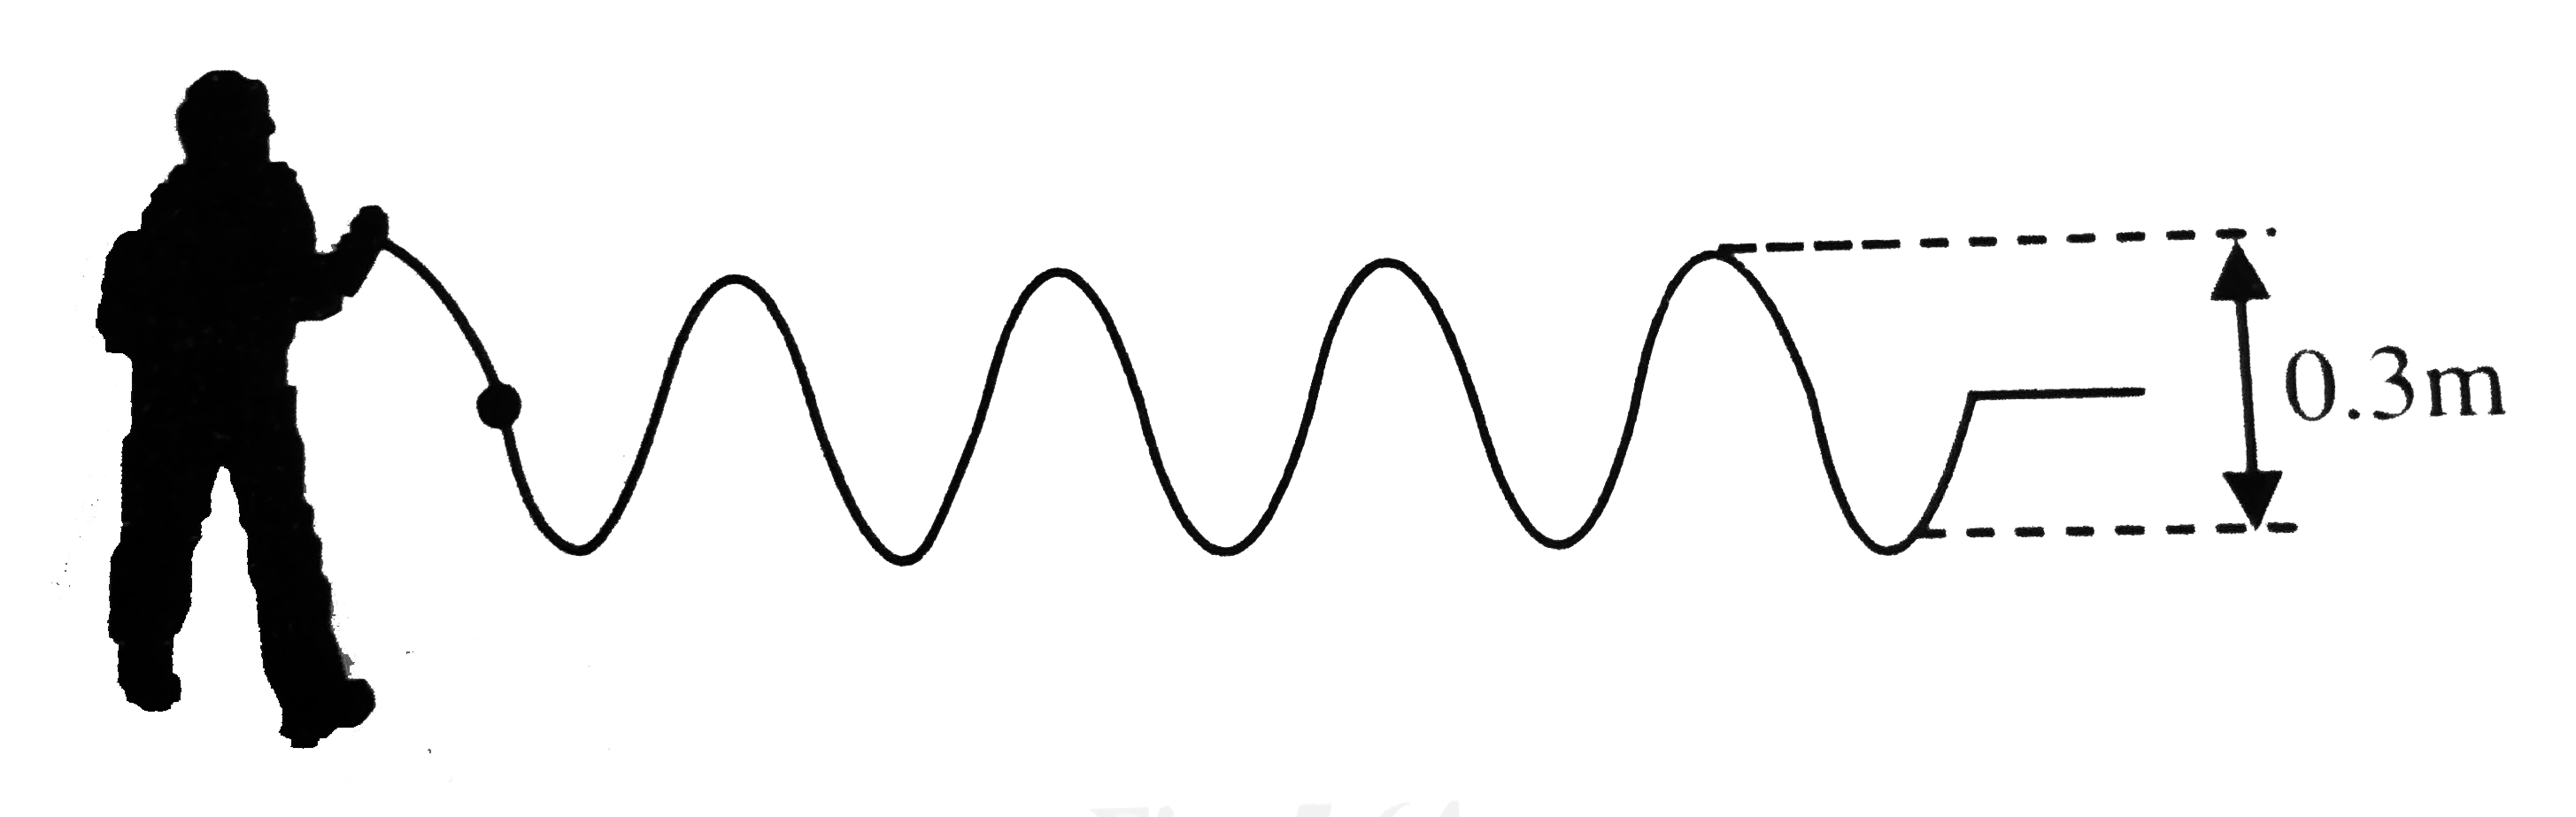 figure. Shows a student setting up wave wave on a long stretched string. The student's hand makes one complete up and down movement in 0.4 s and in each up and down movement the hand moves by a height of 0.3 m. The wavelength of the  waves on the string is 0.8 m.      The frequency of the wave is